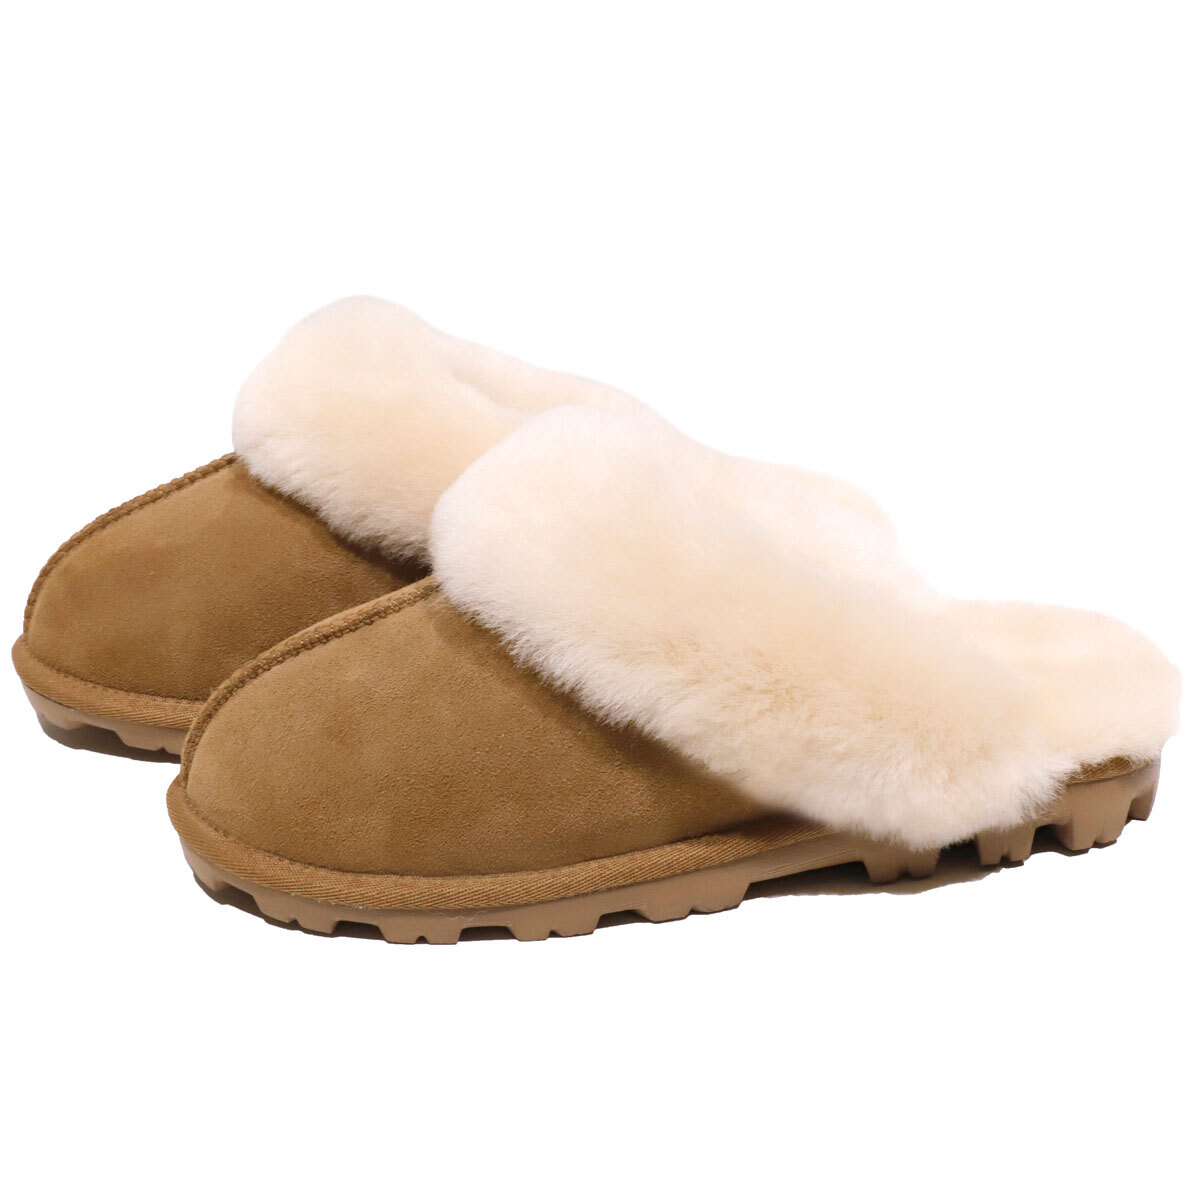 mens shearling slippers costco